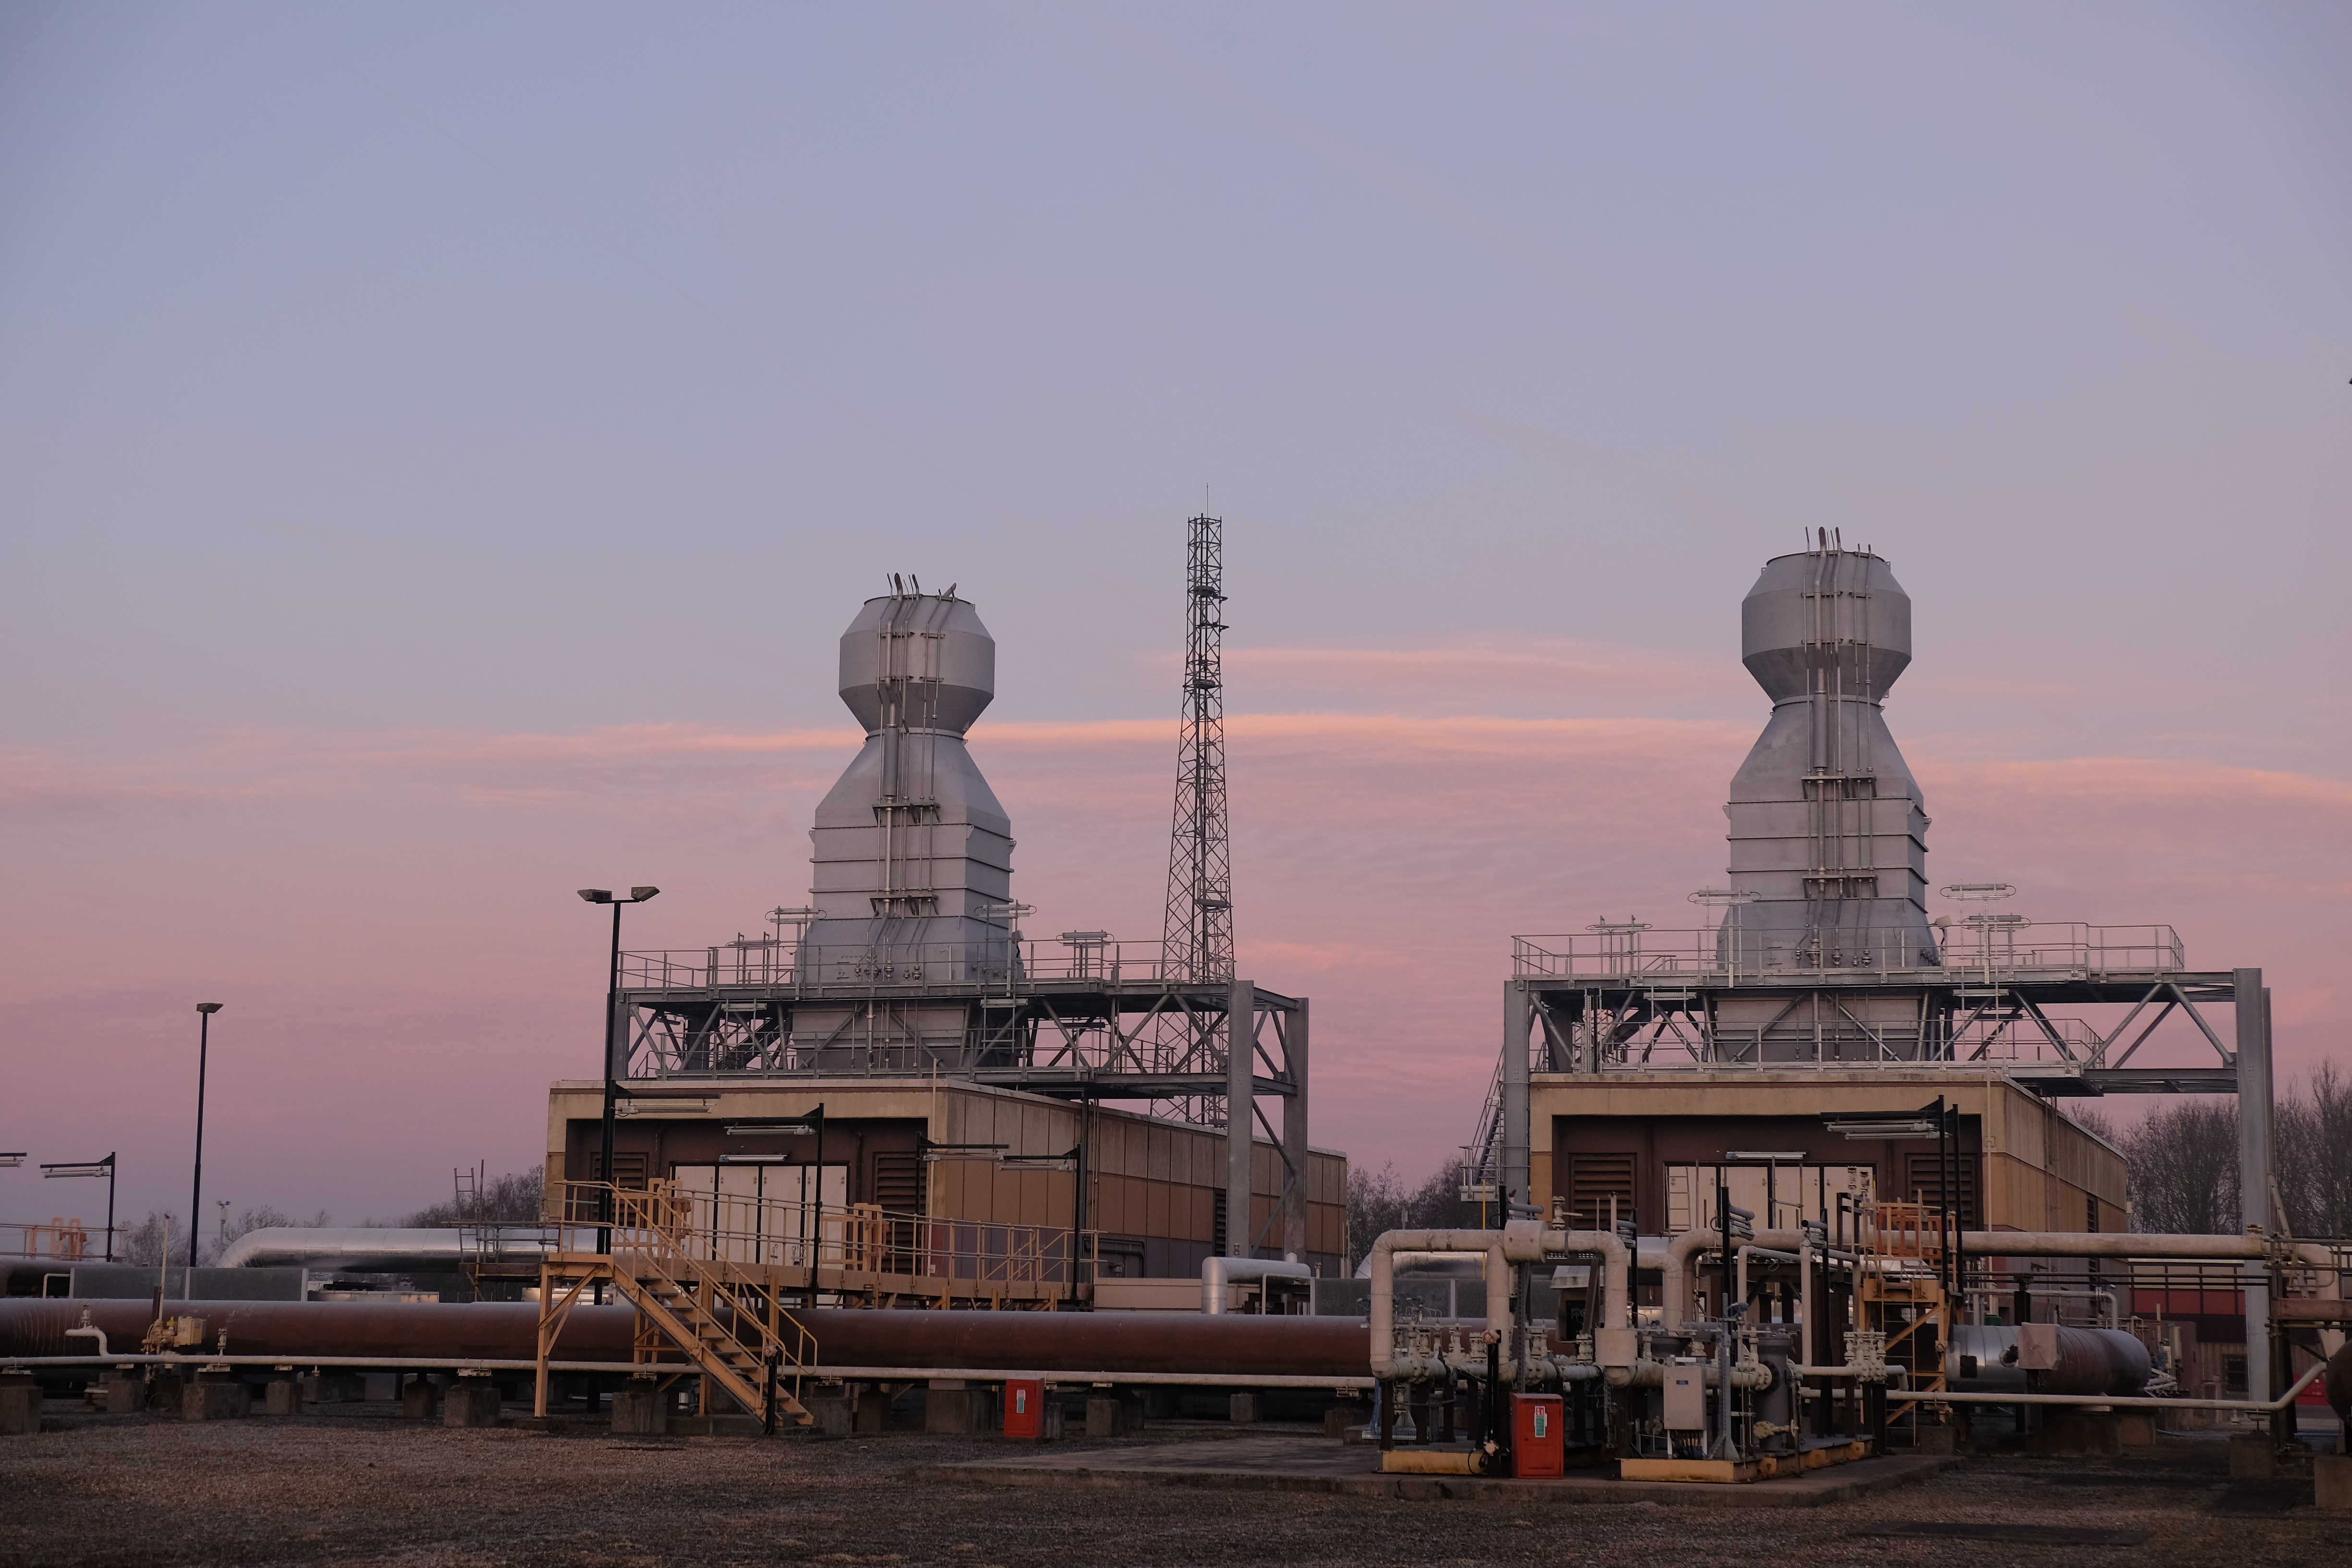 Two industrial work sites at dusk 